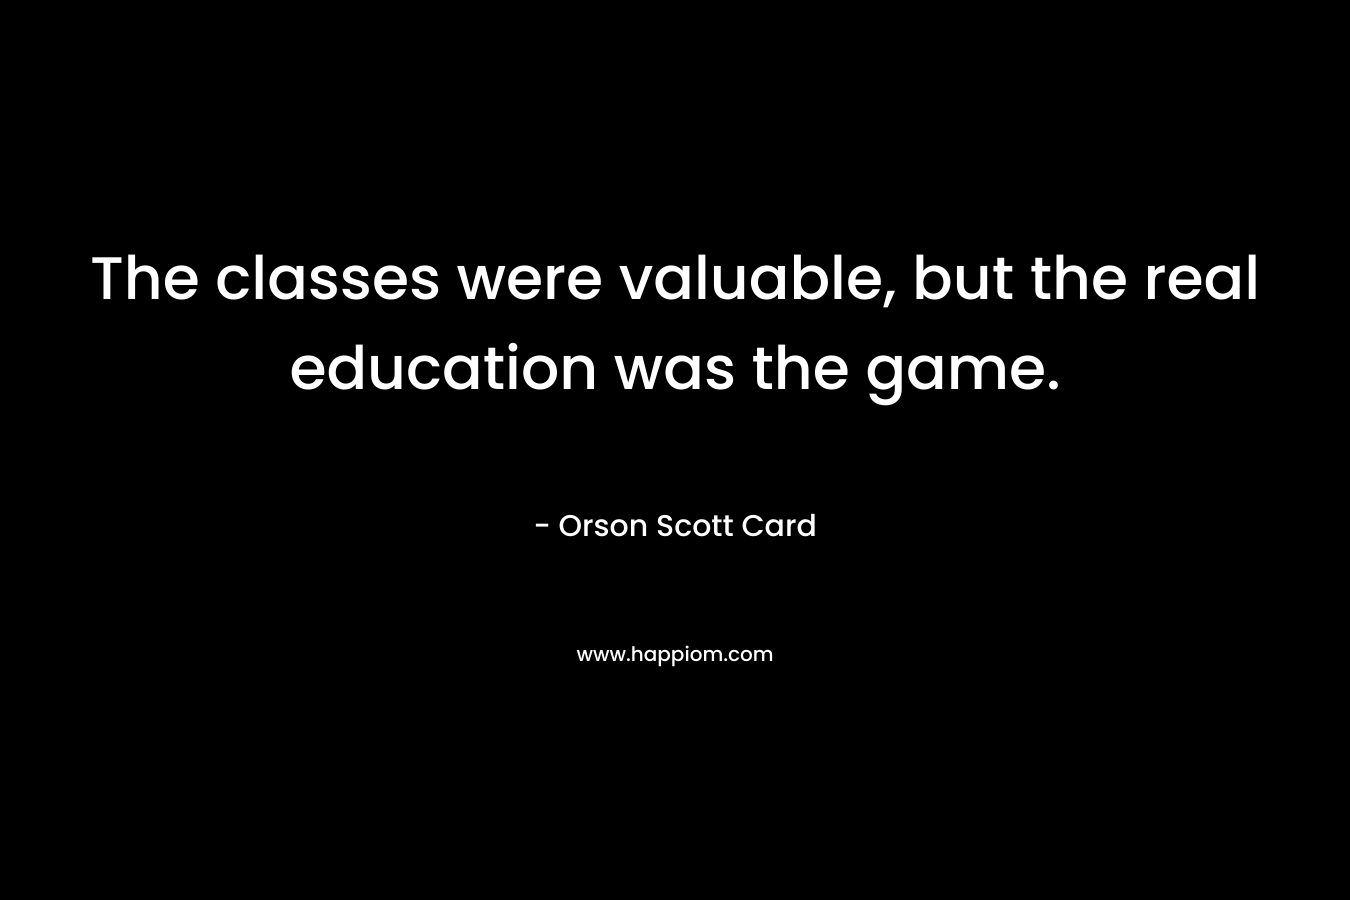 The classes were valuable, but the real education was the game.